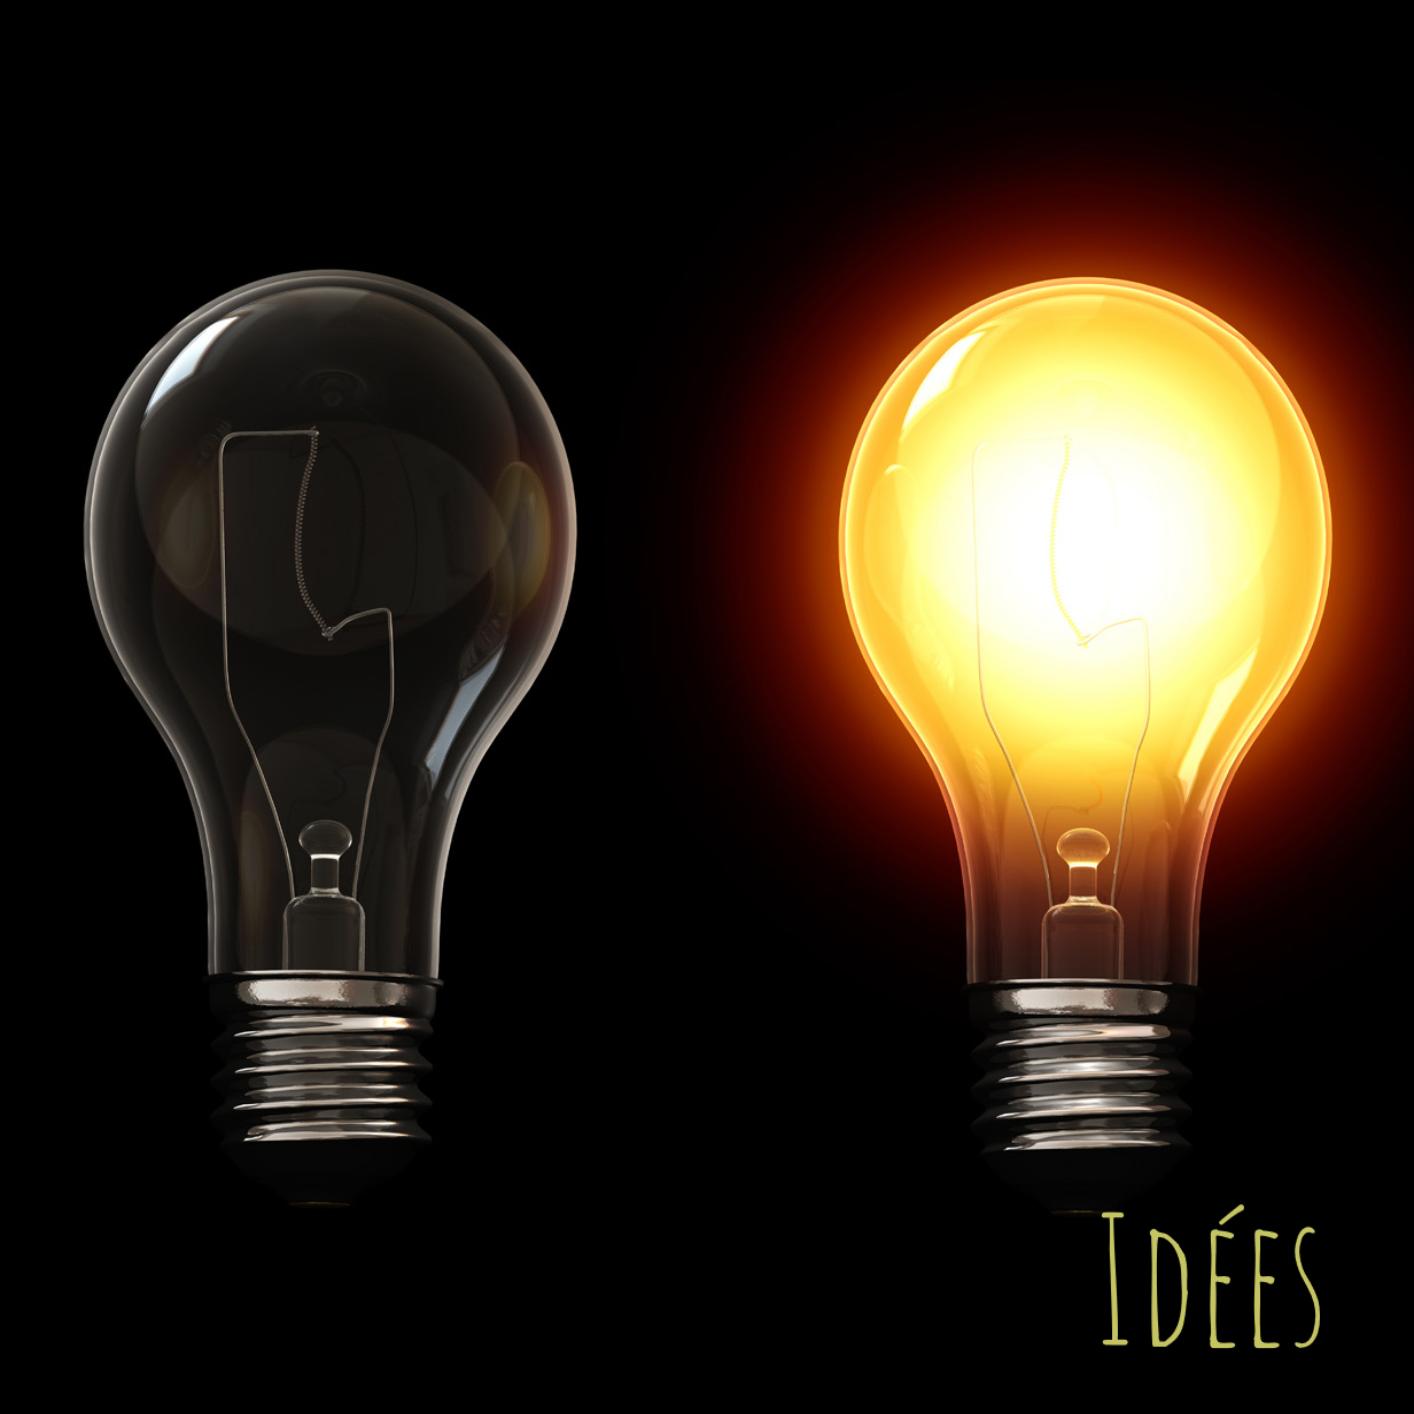 Two lights bulbs one off and one on to illustrate the birth of new ideas